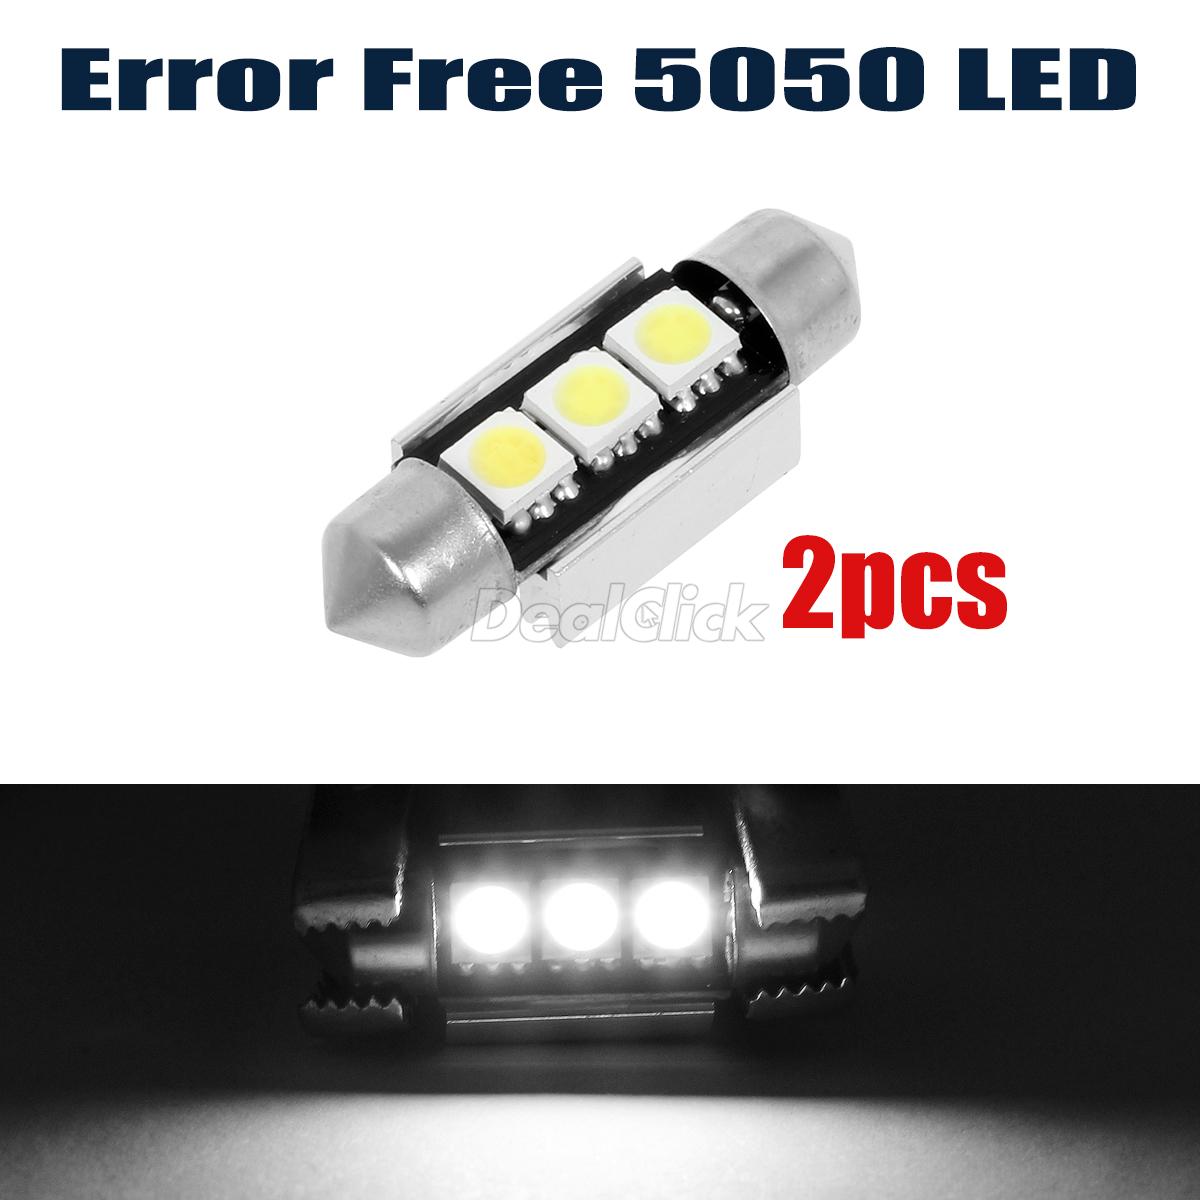 2x Peugeot 208 Bright Xenon White 3SMD LED Canbus Number Plate Light Bulbs